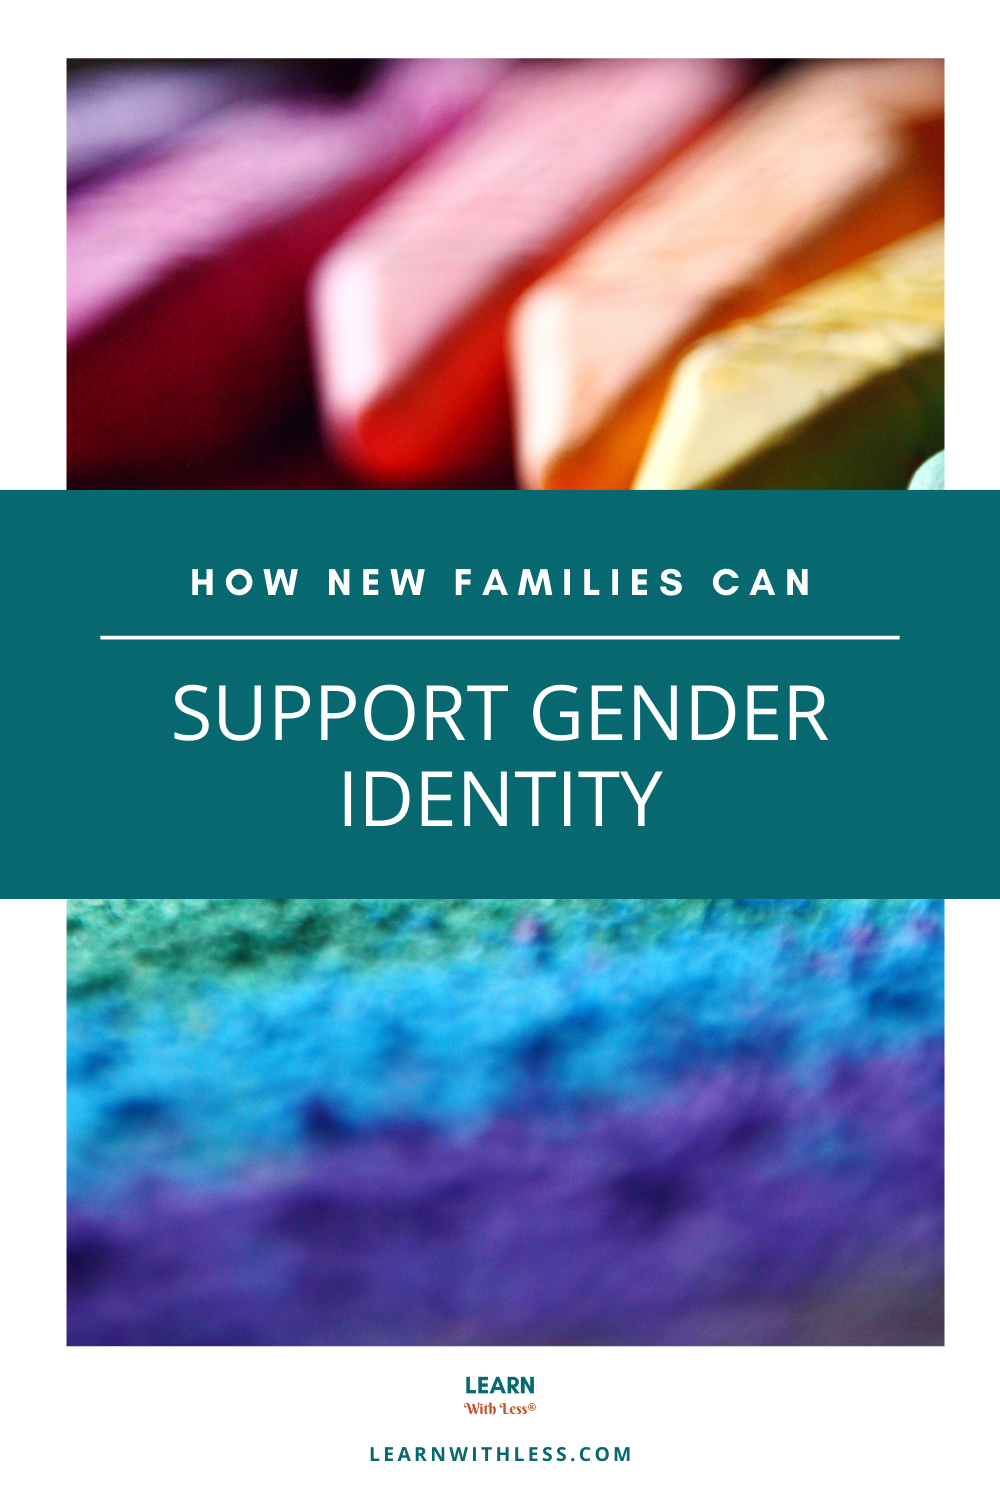 How Families Can Support Gender Identity, with Mason Aid